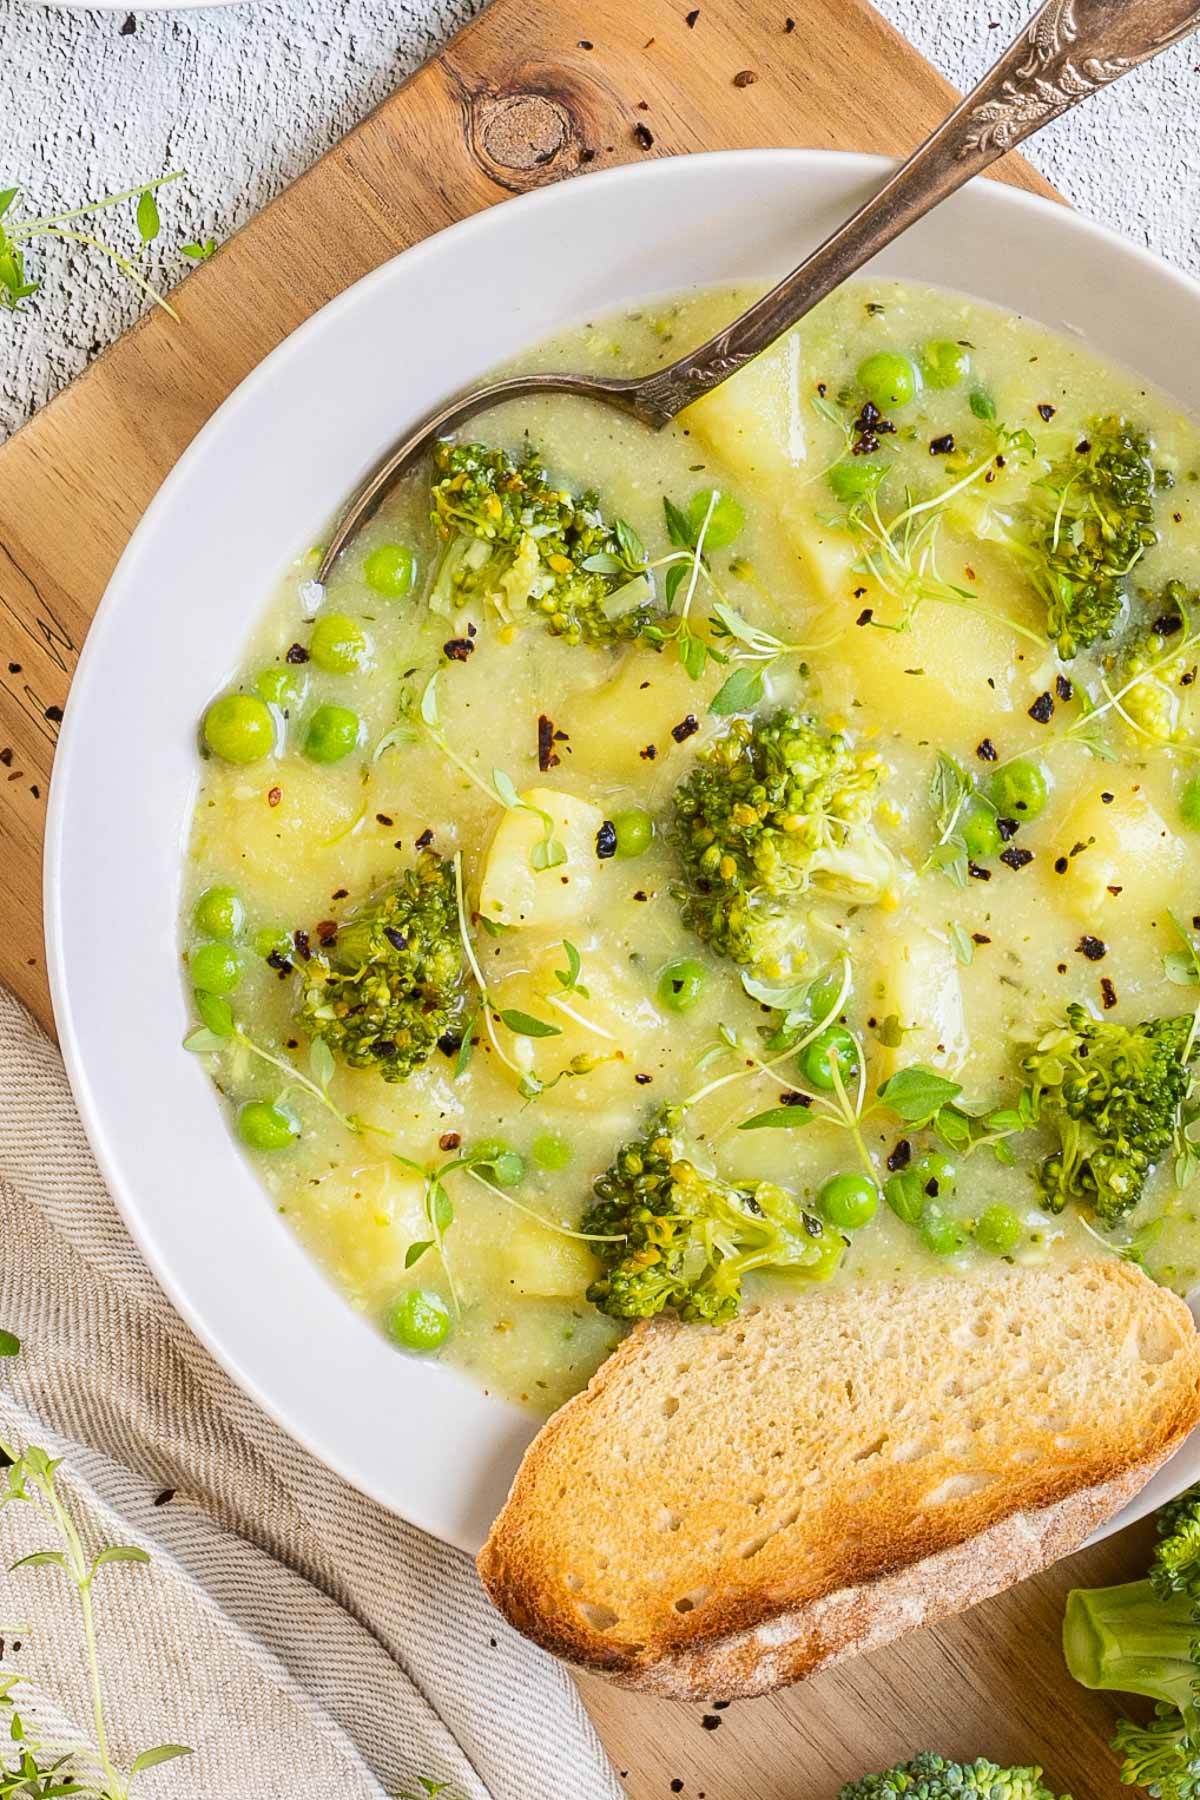 A white plate of thick yellow stew with potatoes, broccoli, green peas and green herbs. A spoon is placed inside with a toasted slice of bread.